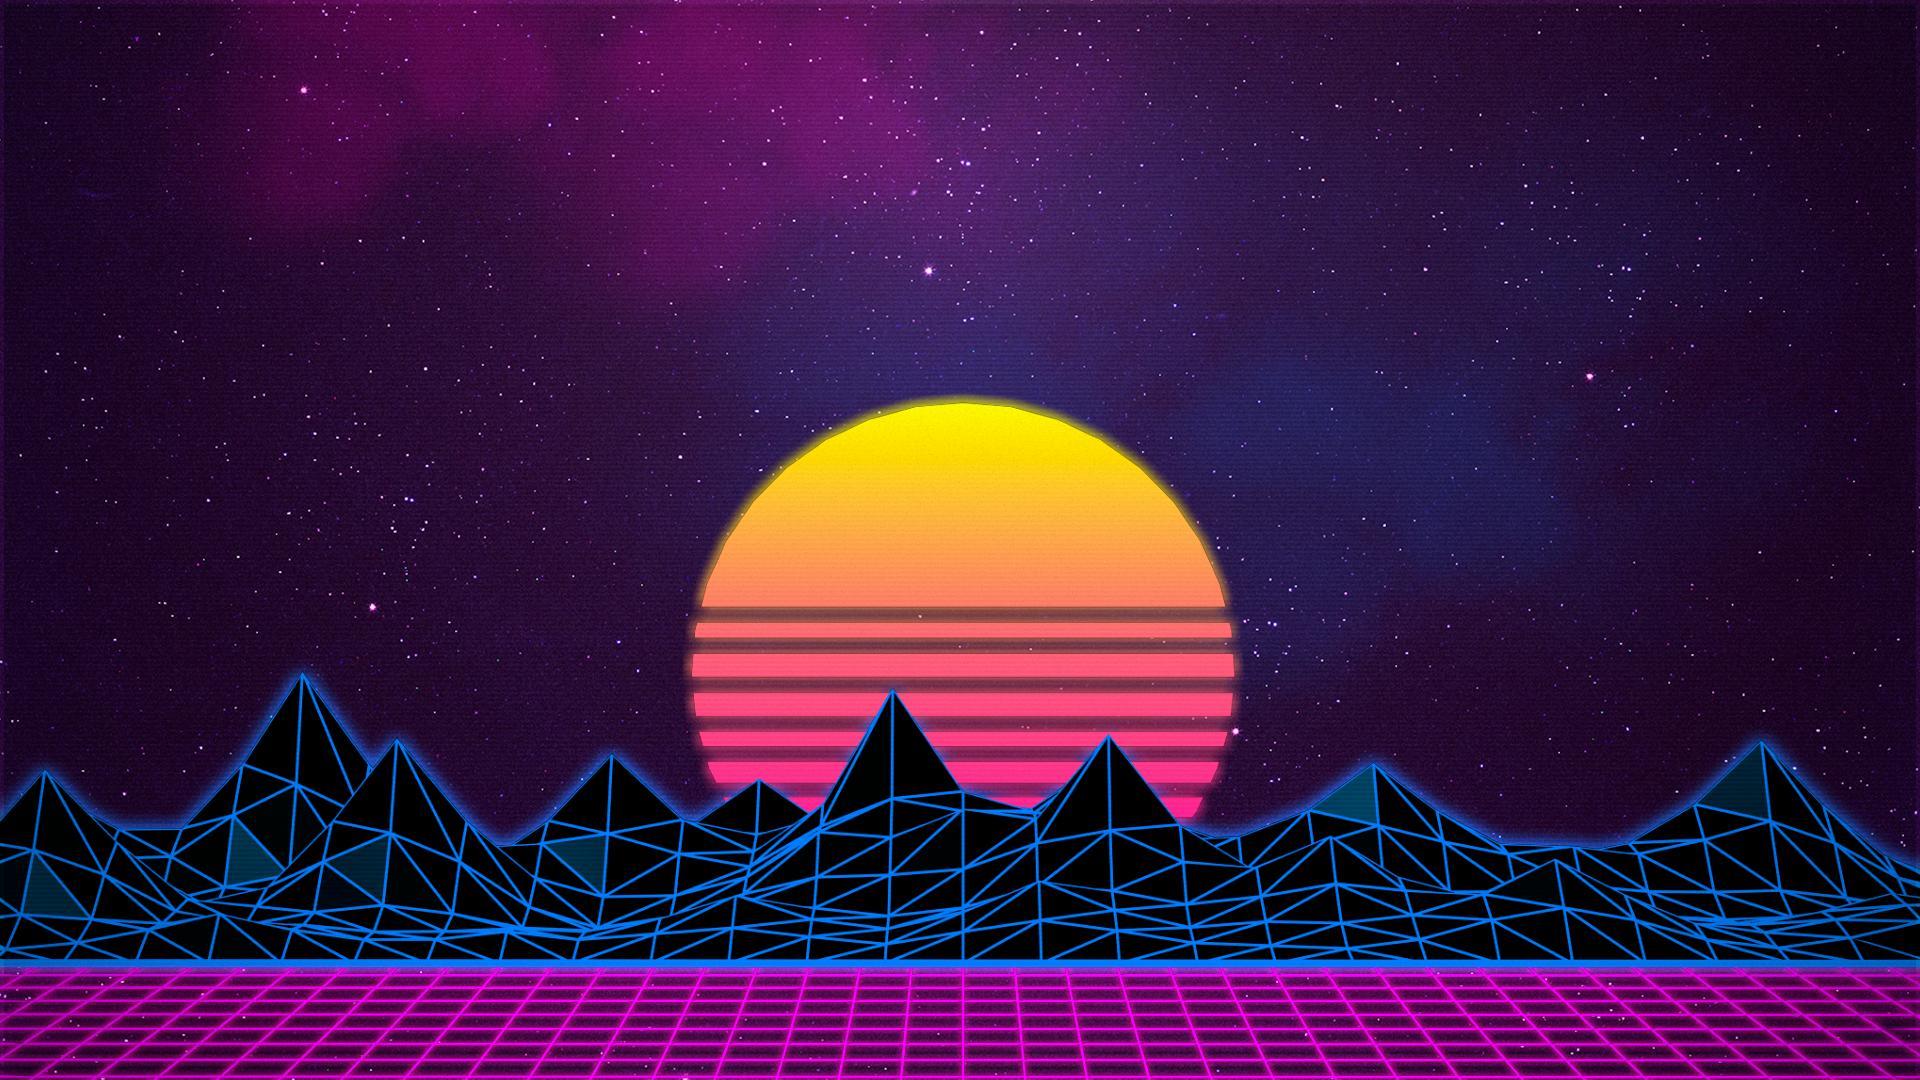 1920x1080] Retro 80's wallpapers : wallpapers